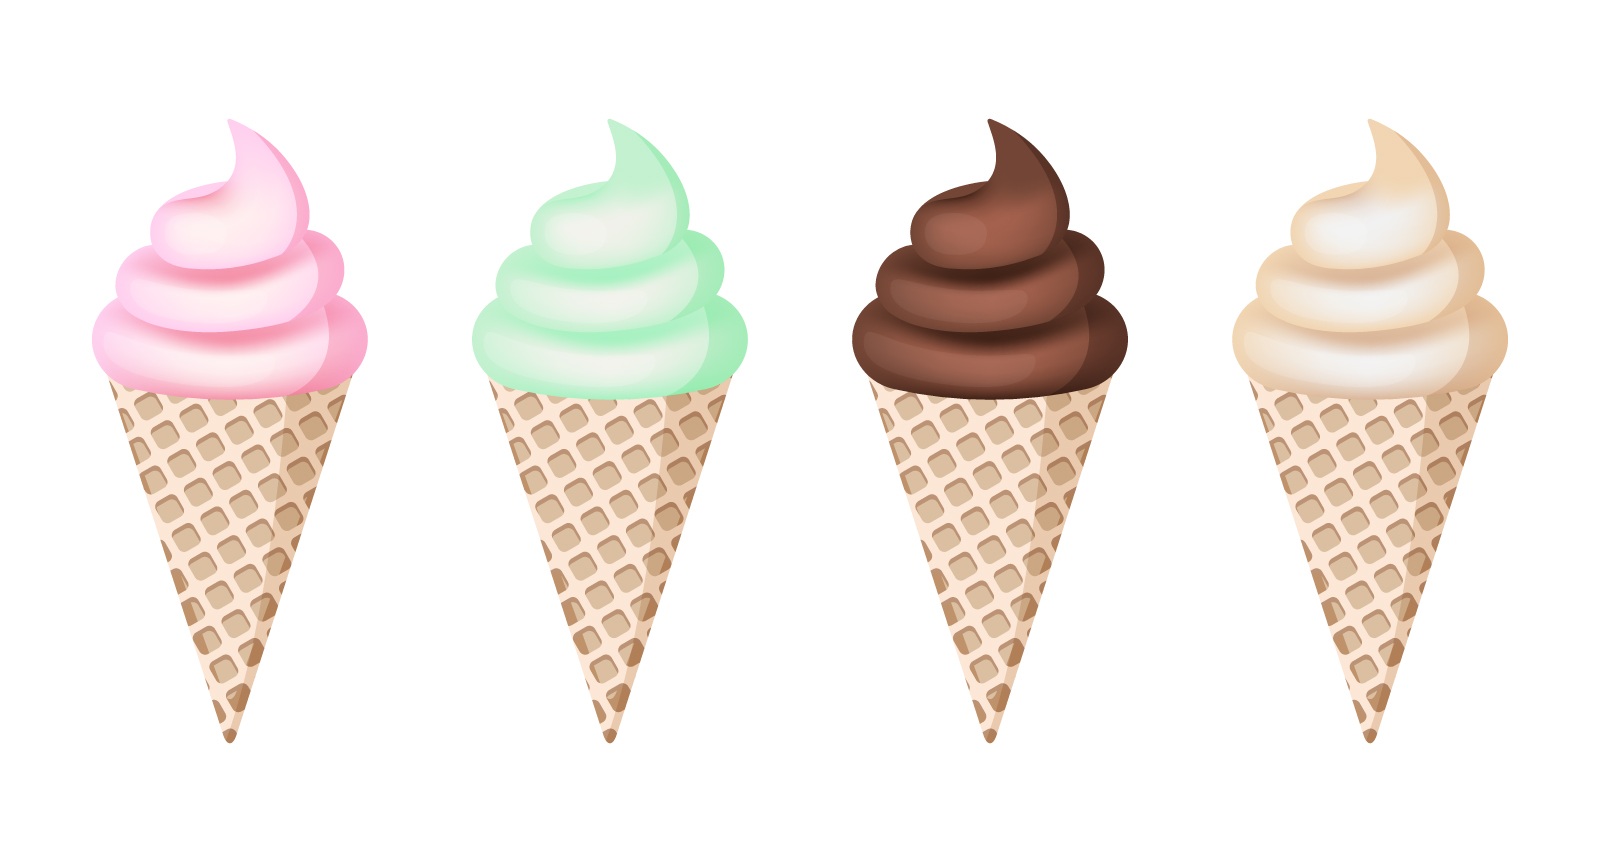 Strawberry, mint, chocolate and vanilla ice cream waffle cones on the white background